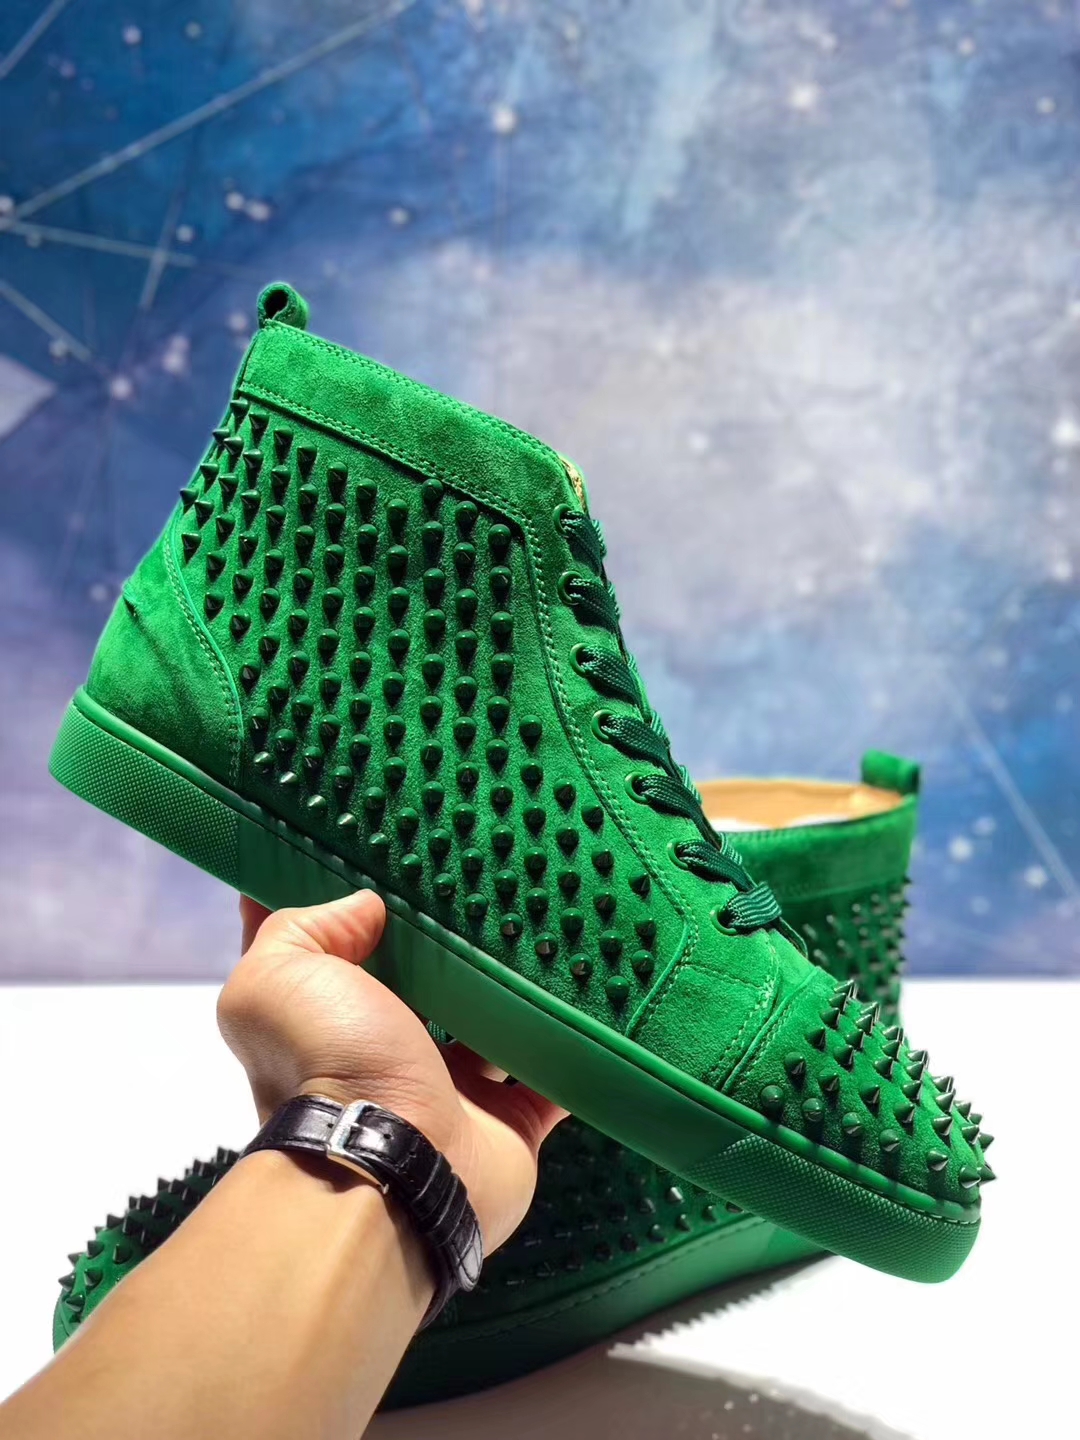 red bottom shoes for men - Christian Louboutin Green Suede High Top Spikes Flats Men Sneakers ...